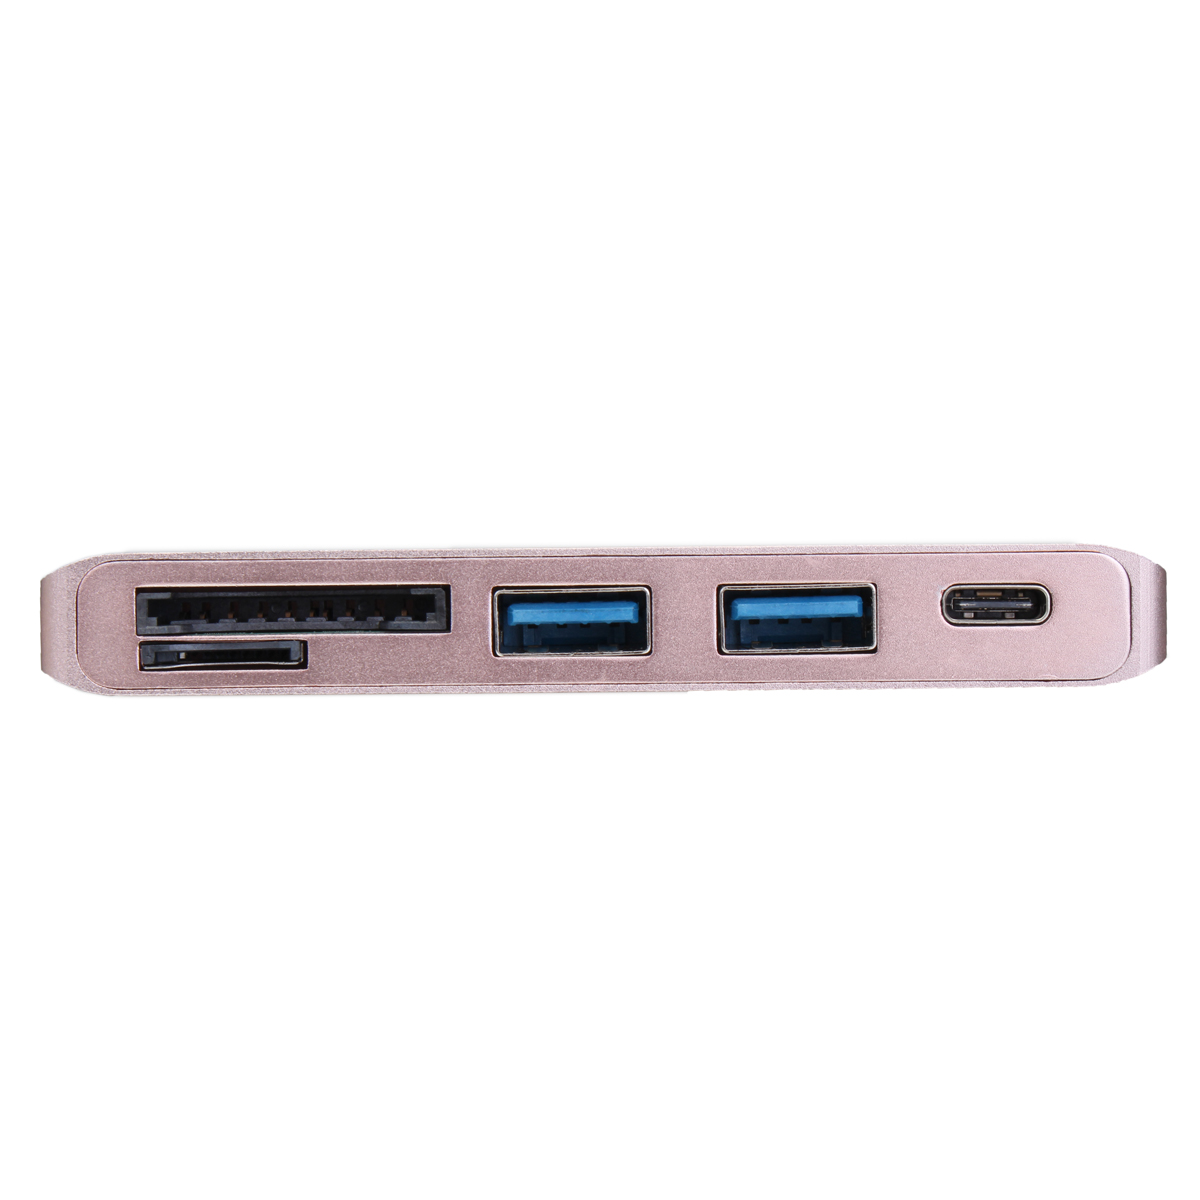 Multifunction-USB-Hub-Type-C-to-Type-C-USB-30-2Ports-TF-SD-Card-Reader-for-Laptop-PC-1153671-4